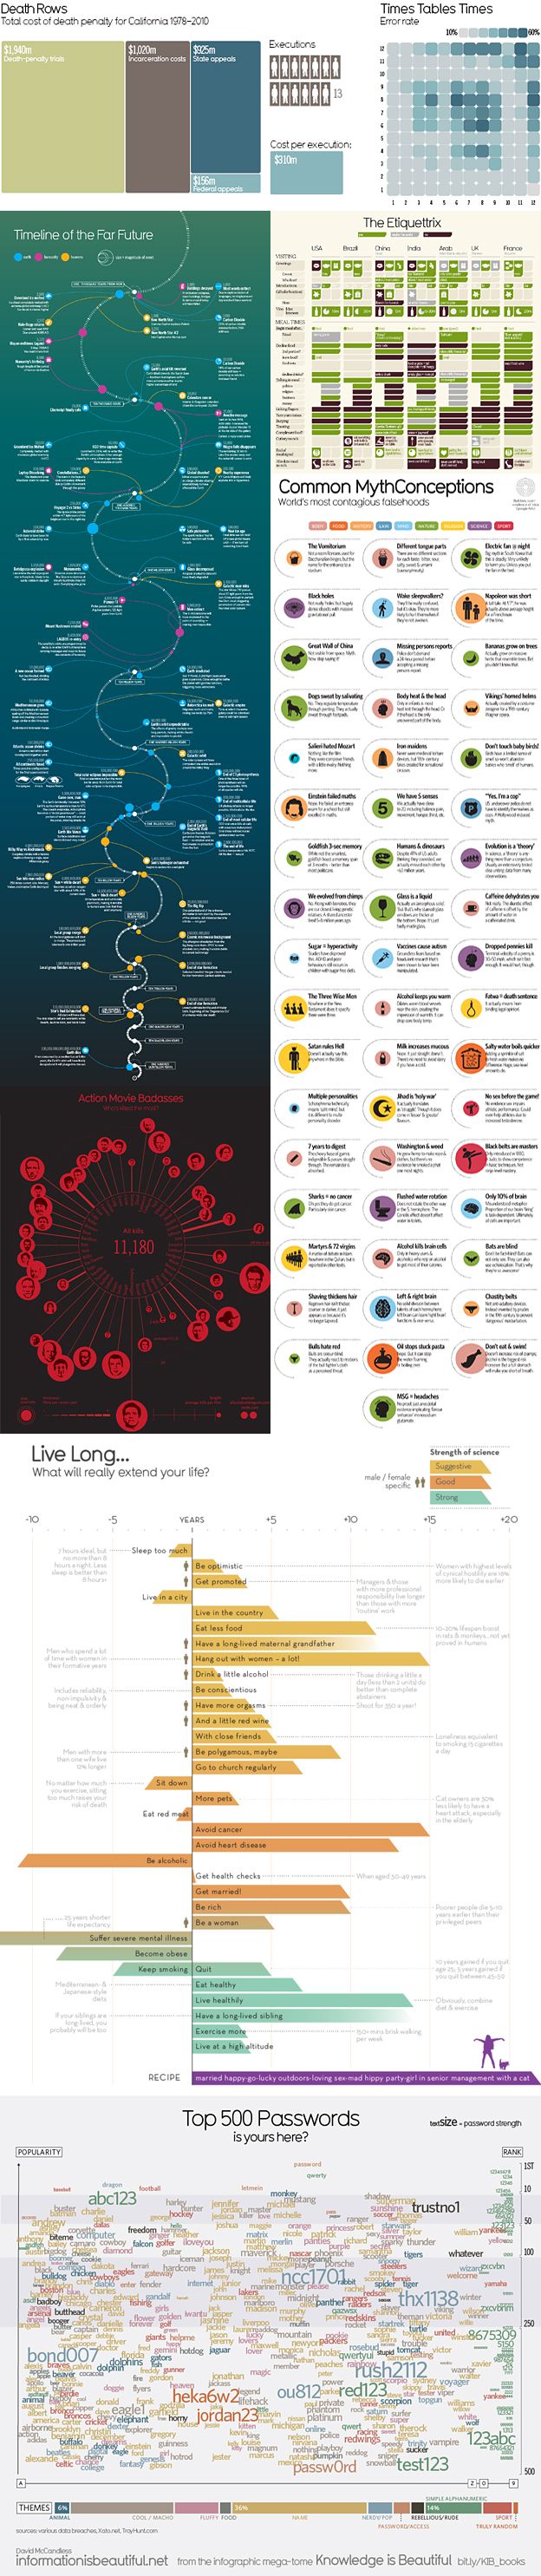 Composite image of inforgraphics - by David McCandless 'Knowledge is Beautiful'